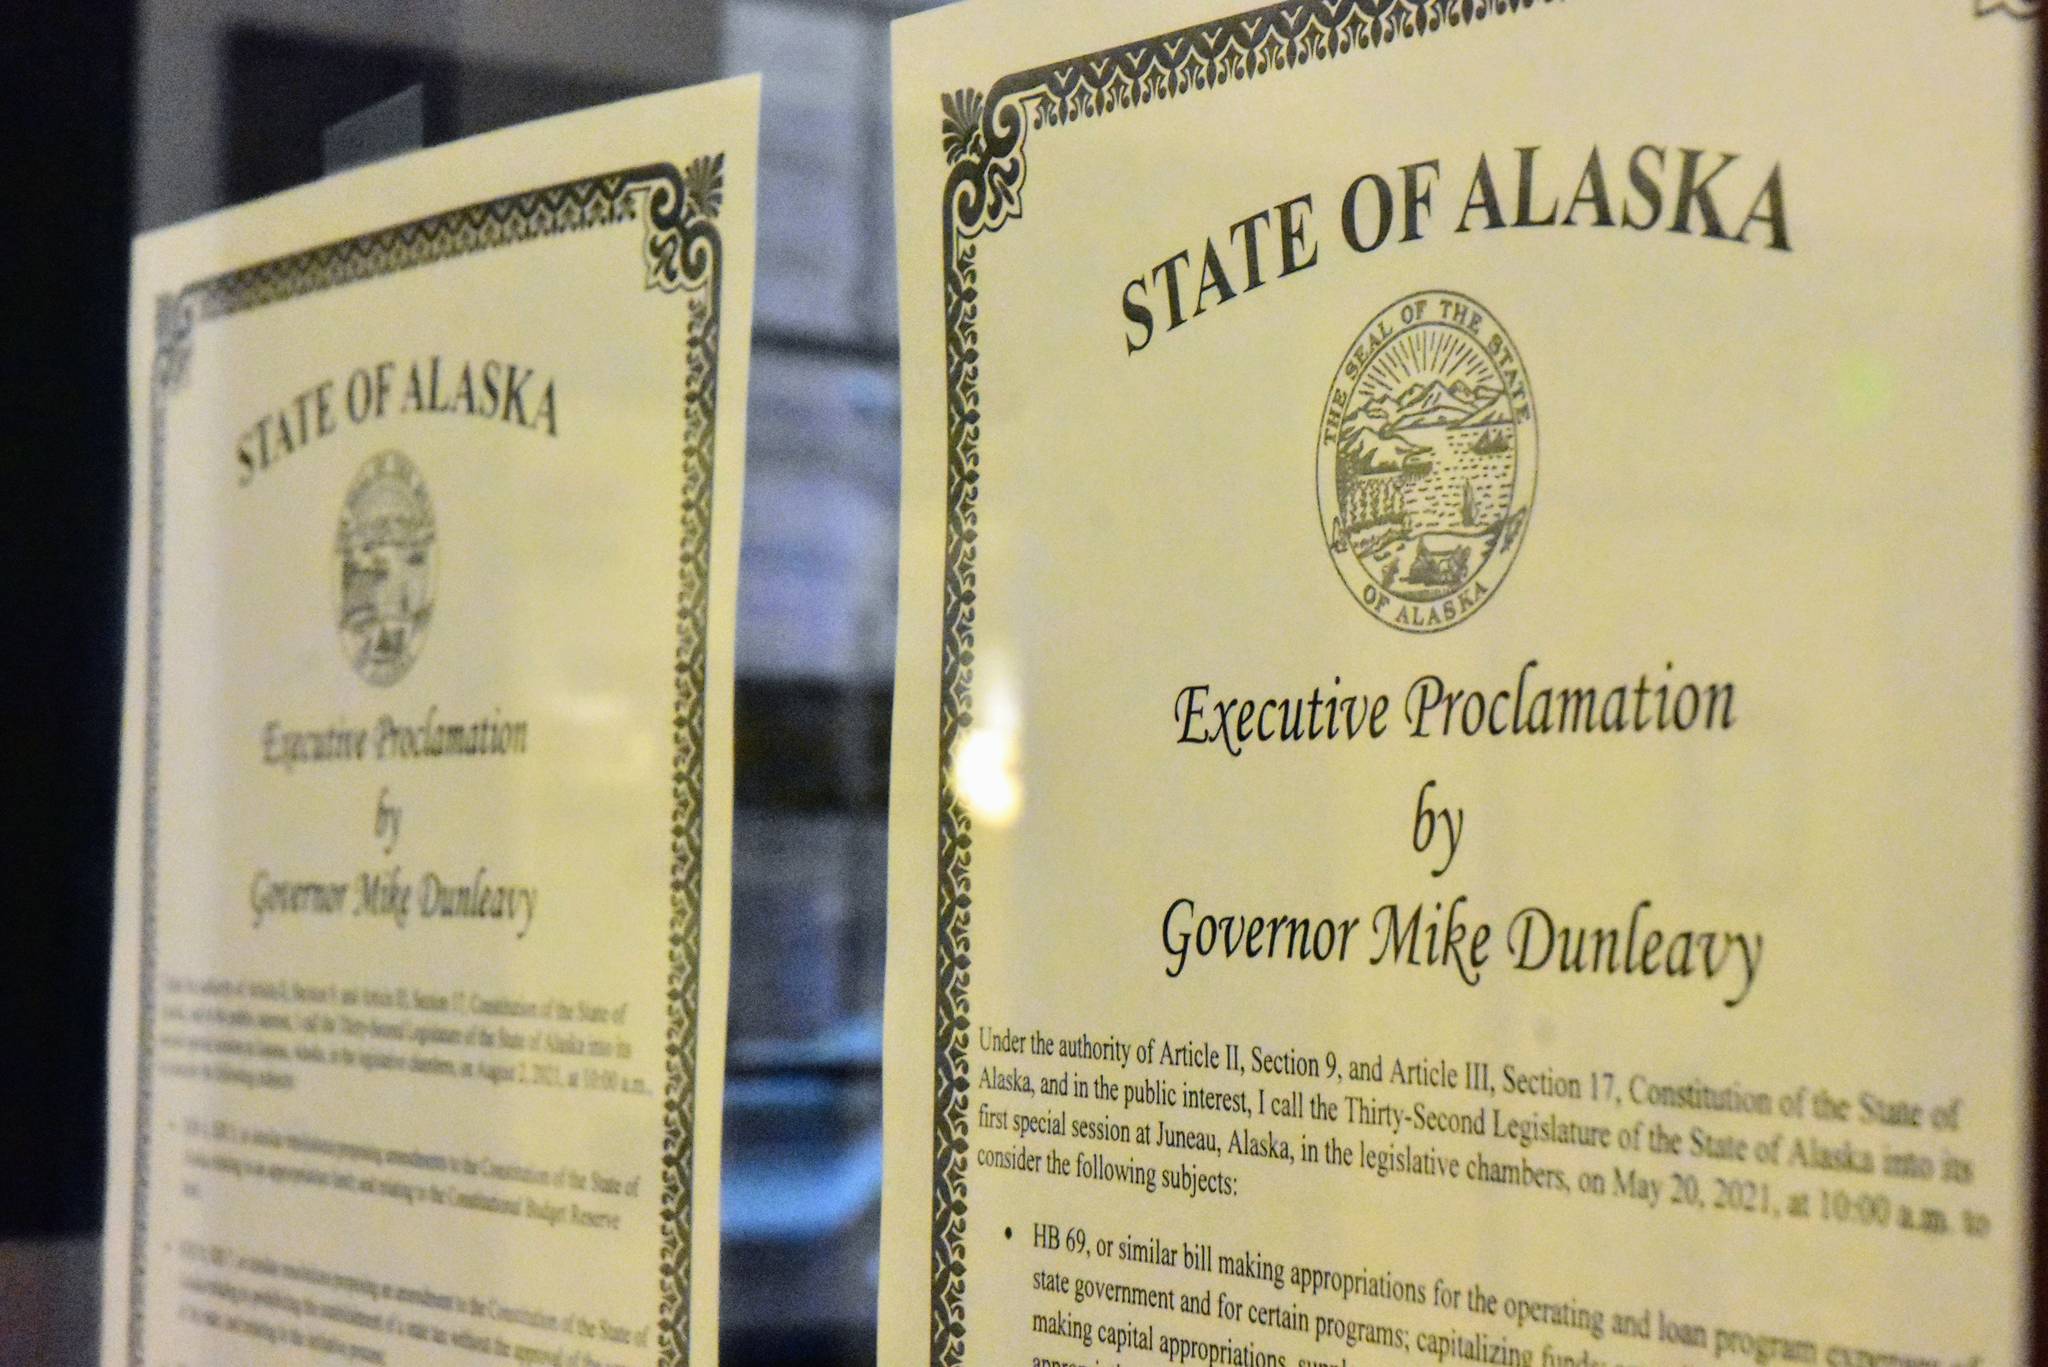 Peter Segall / Juneau Empire
Proclamations from Gov. Mike Dunleavy calling special sessions of the Alaska State Legislature for late May and early August were posted in the otherwise quiet office of the House Clerk on Friday, May 21, 2021. The first special session has started but the Capitol building was quiet as most of the work before lawmakers will take place in committee.